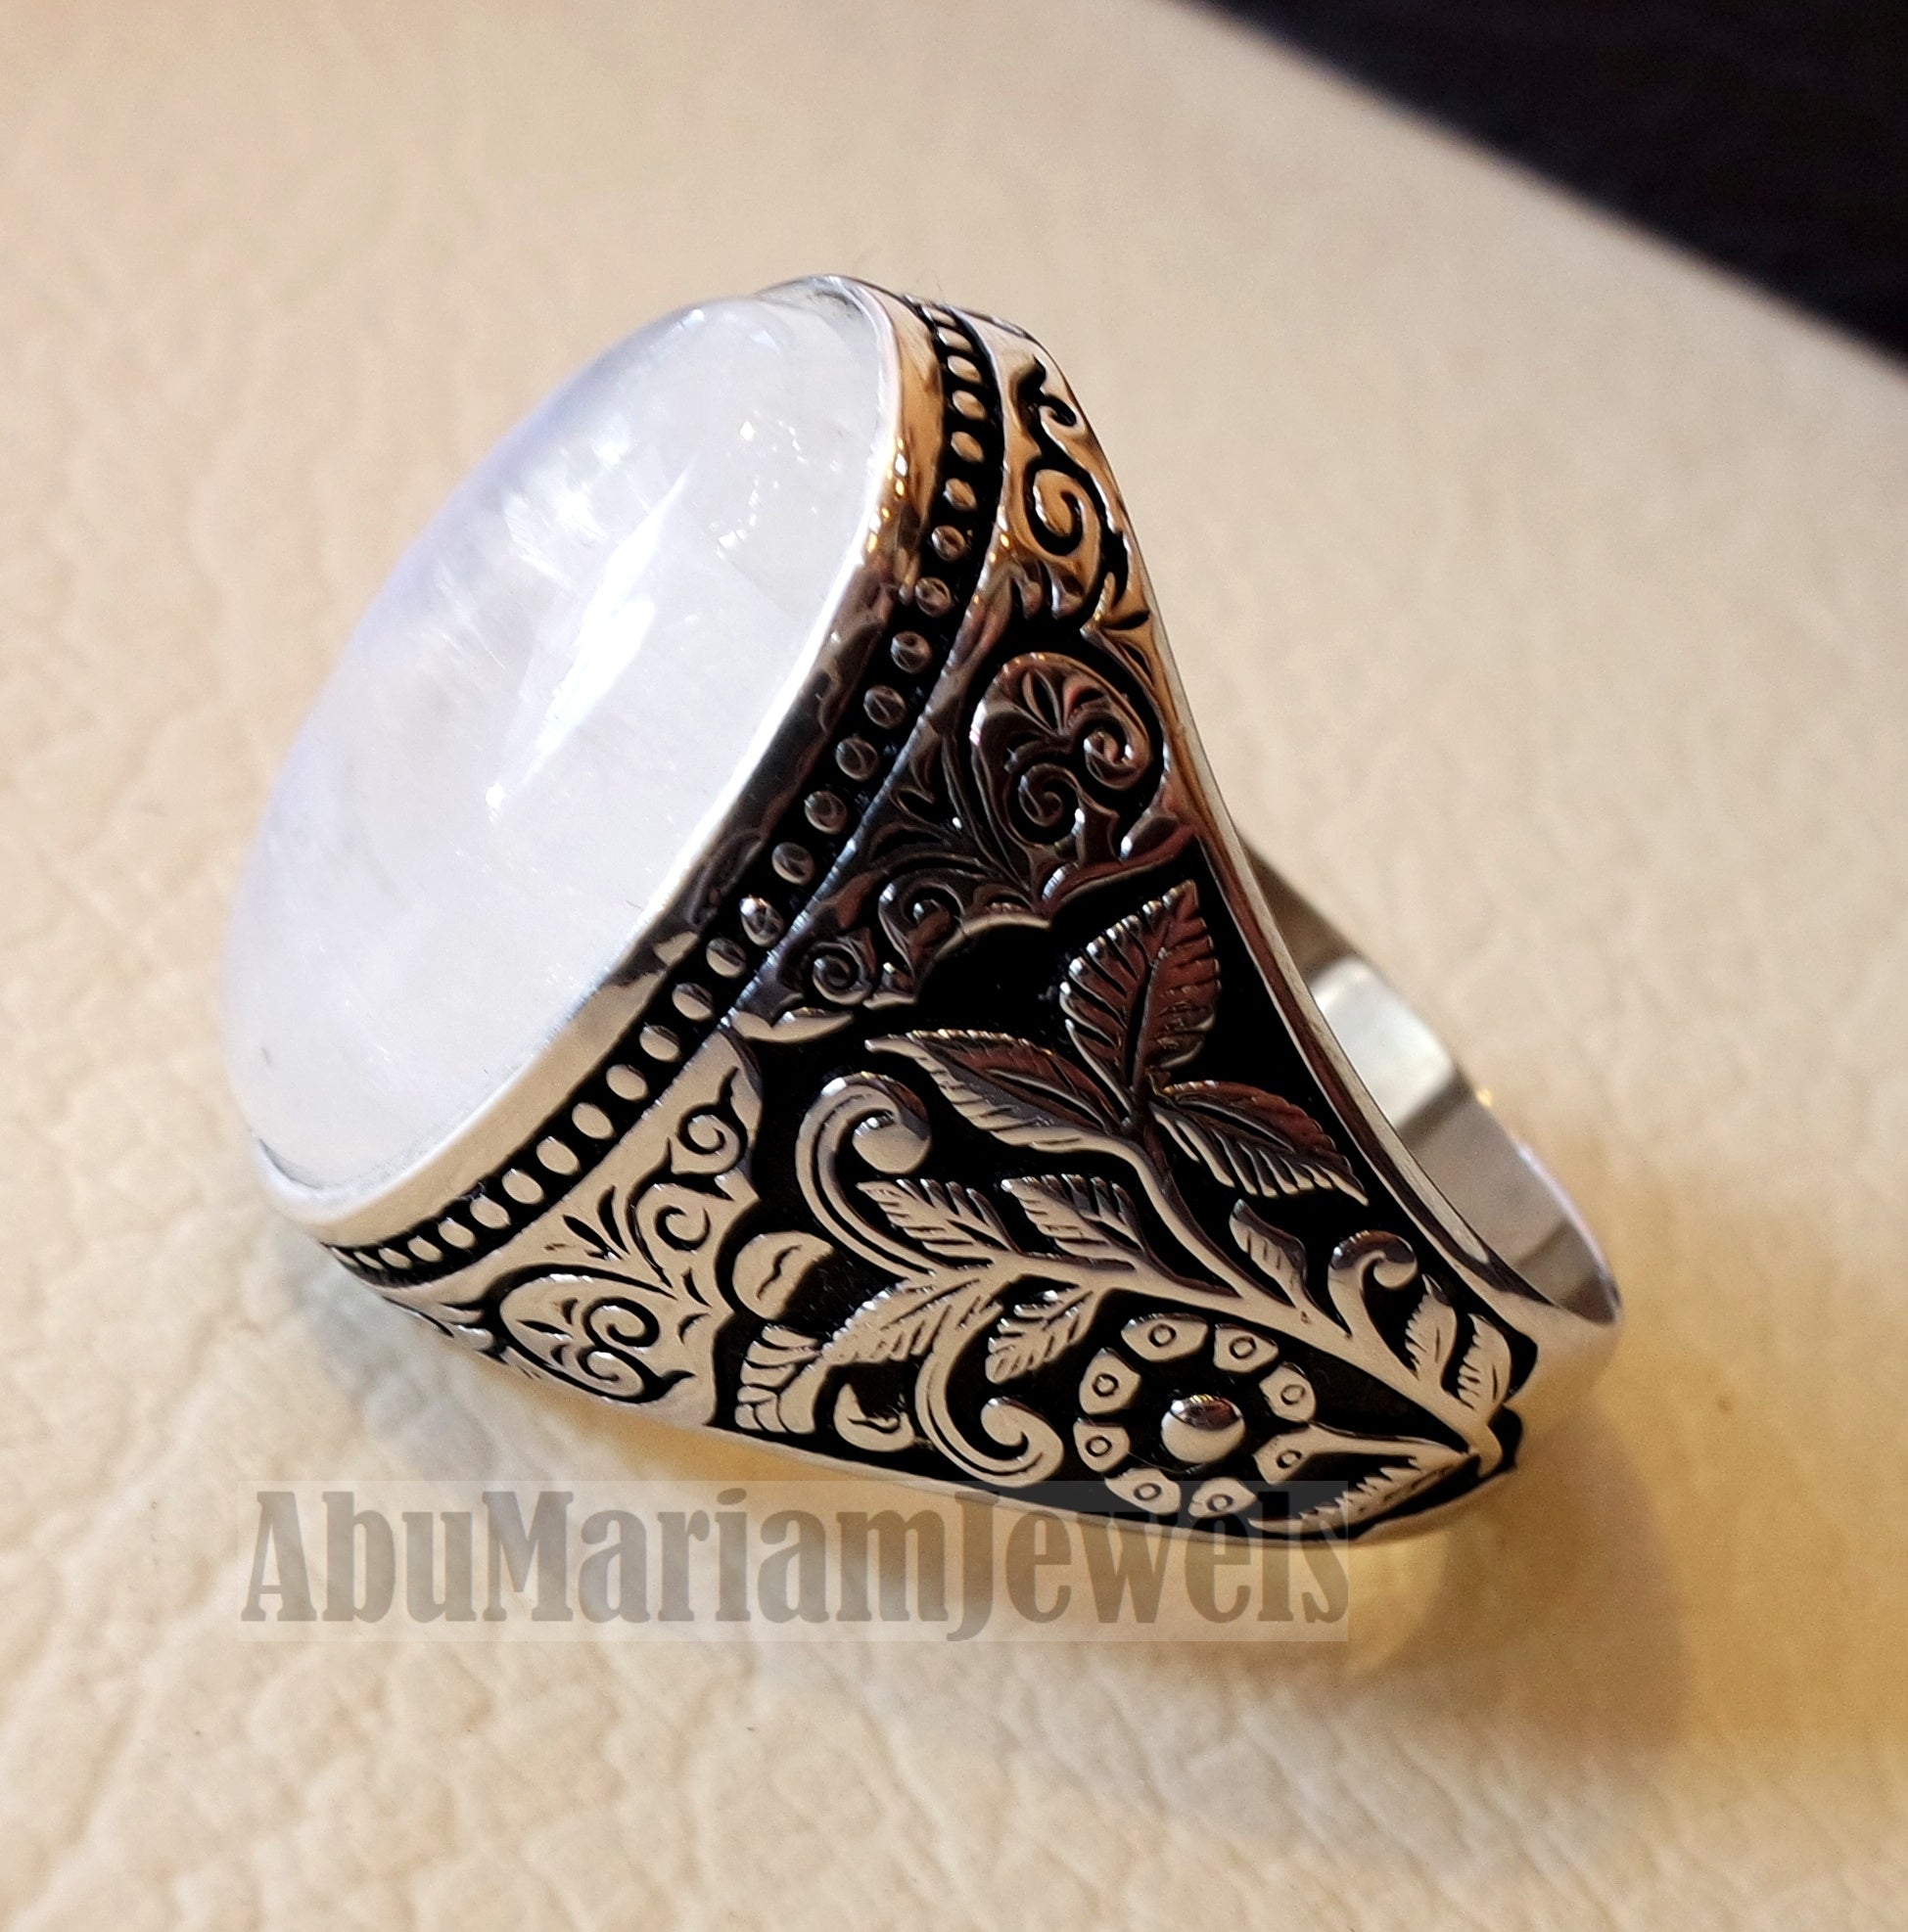 moonstone natural stone durr al najaf men ring jewelry sterling silver 925 stunning genuine gem nature design style jewelry all sizes